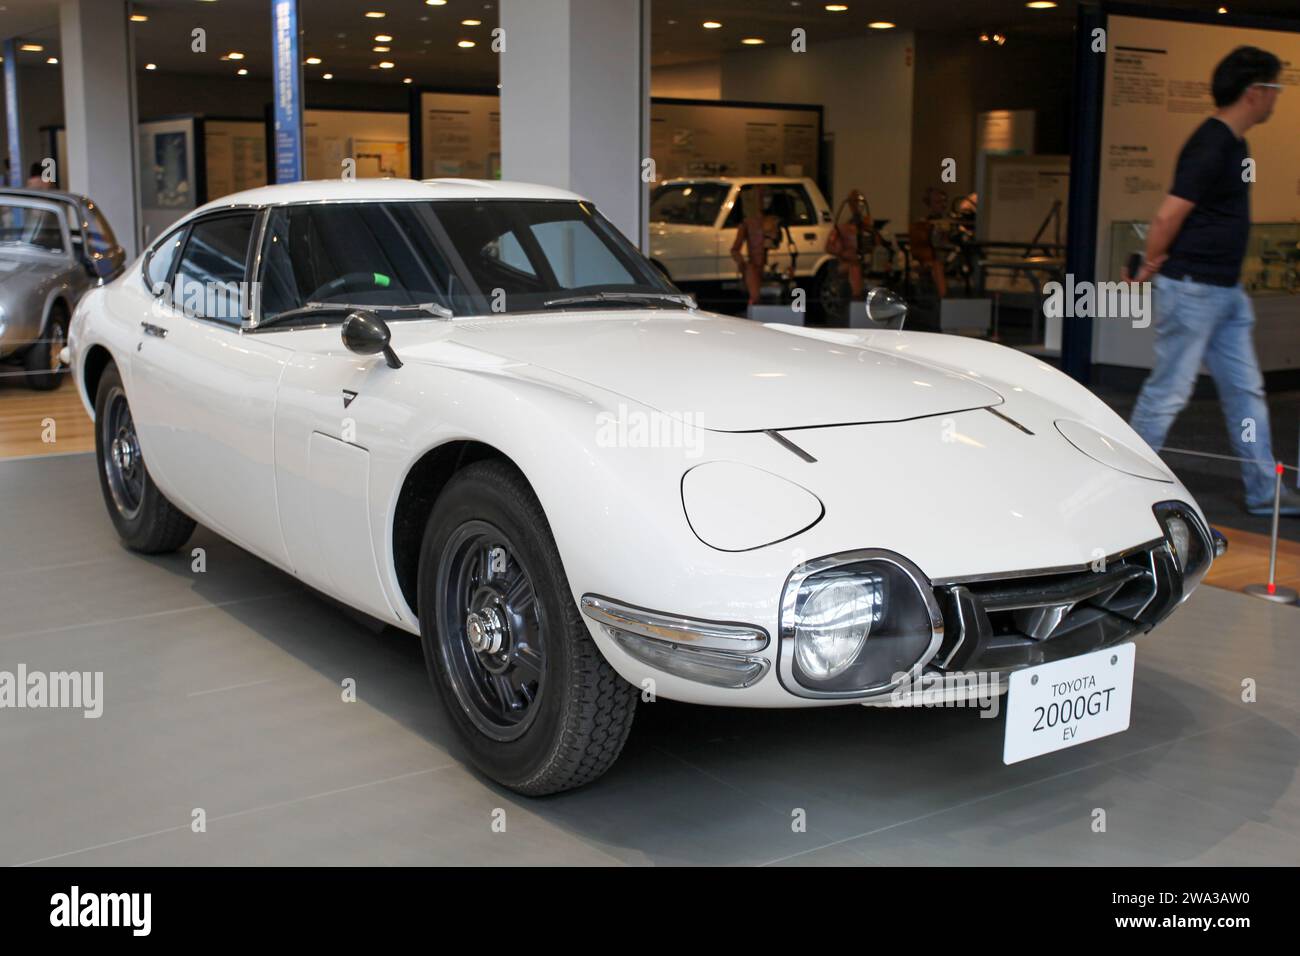 Interior of the Toyota Commemorative Museum of Industry and Technology in Nagoya, Japan. The Toyota 2000 GT is being displayed. Stock Photo